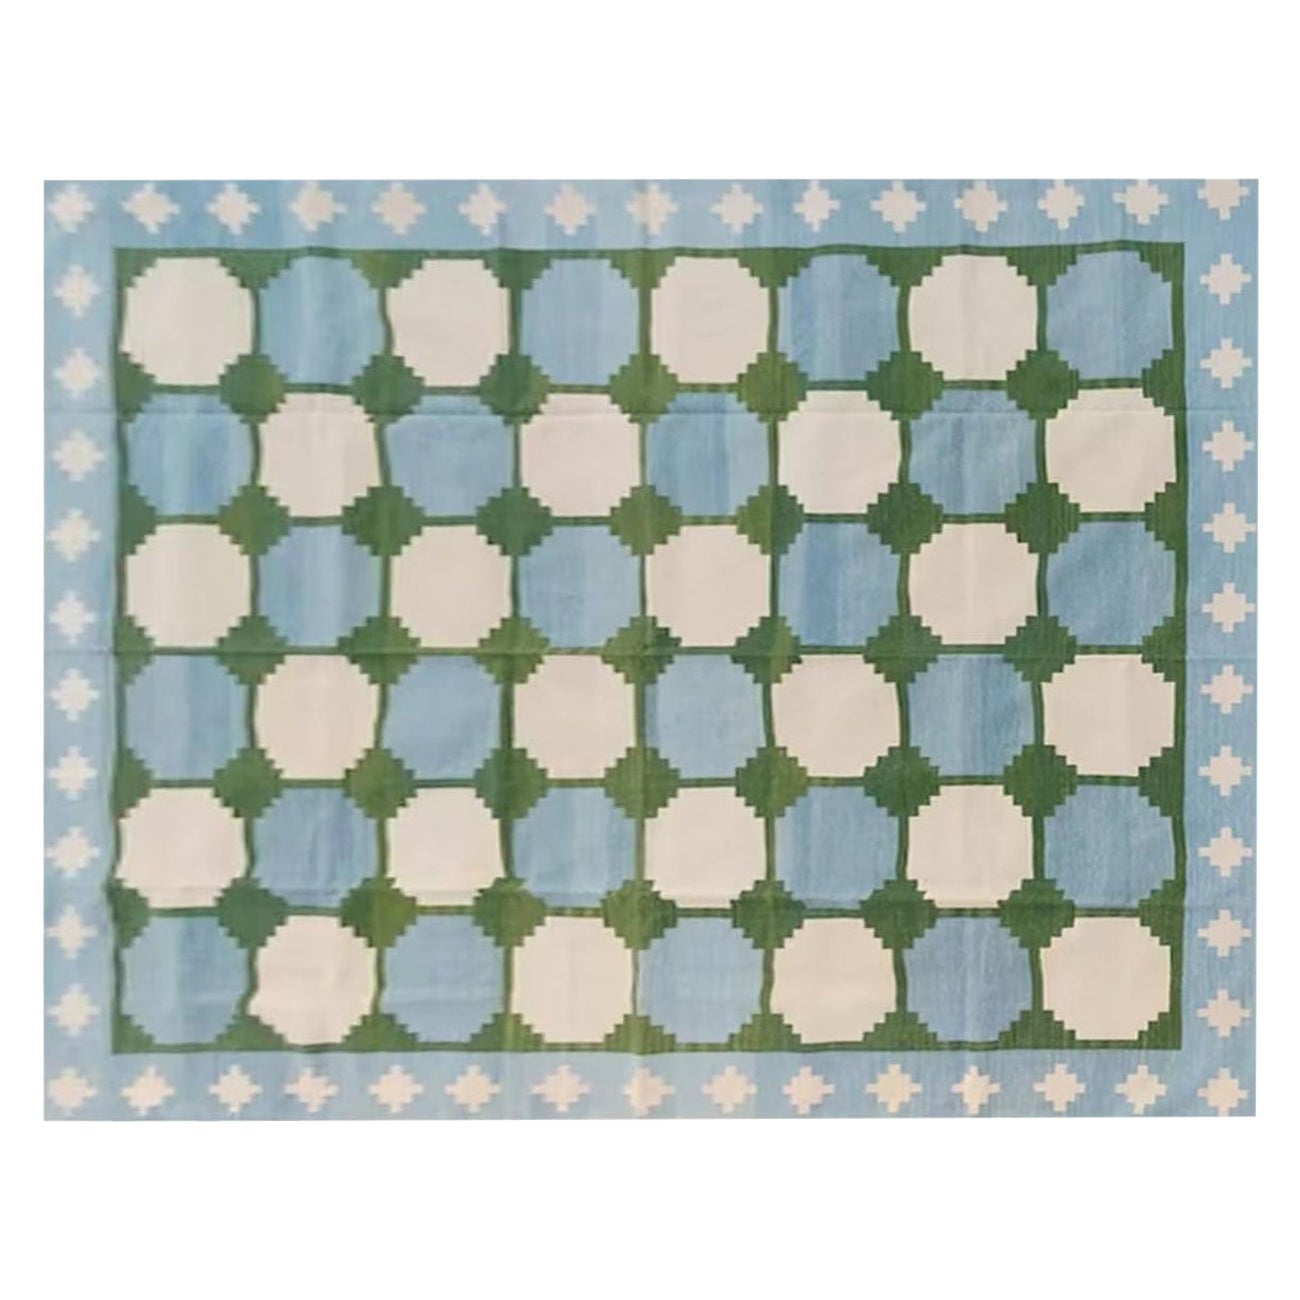 Handmade Cotton Area Flat Weave Rug, 5x8 Blue And Green Tile Indian Dhurrie Rug For Sale